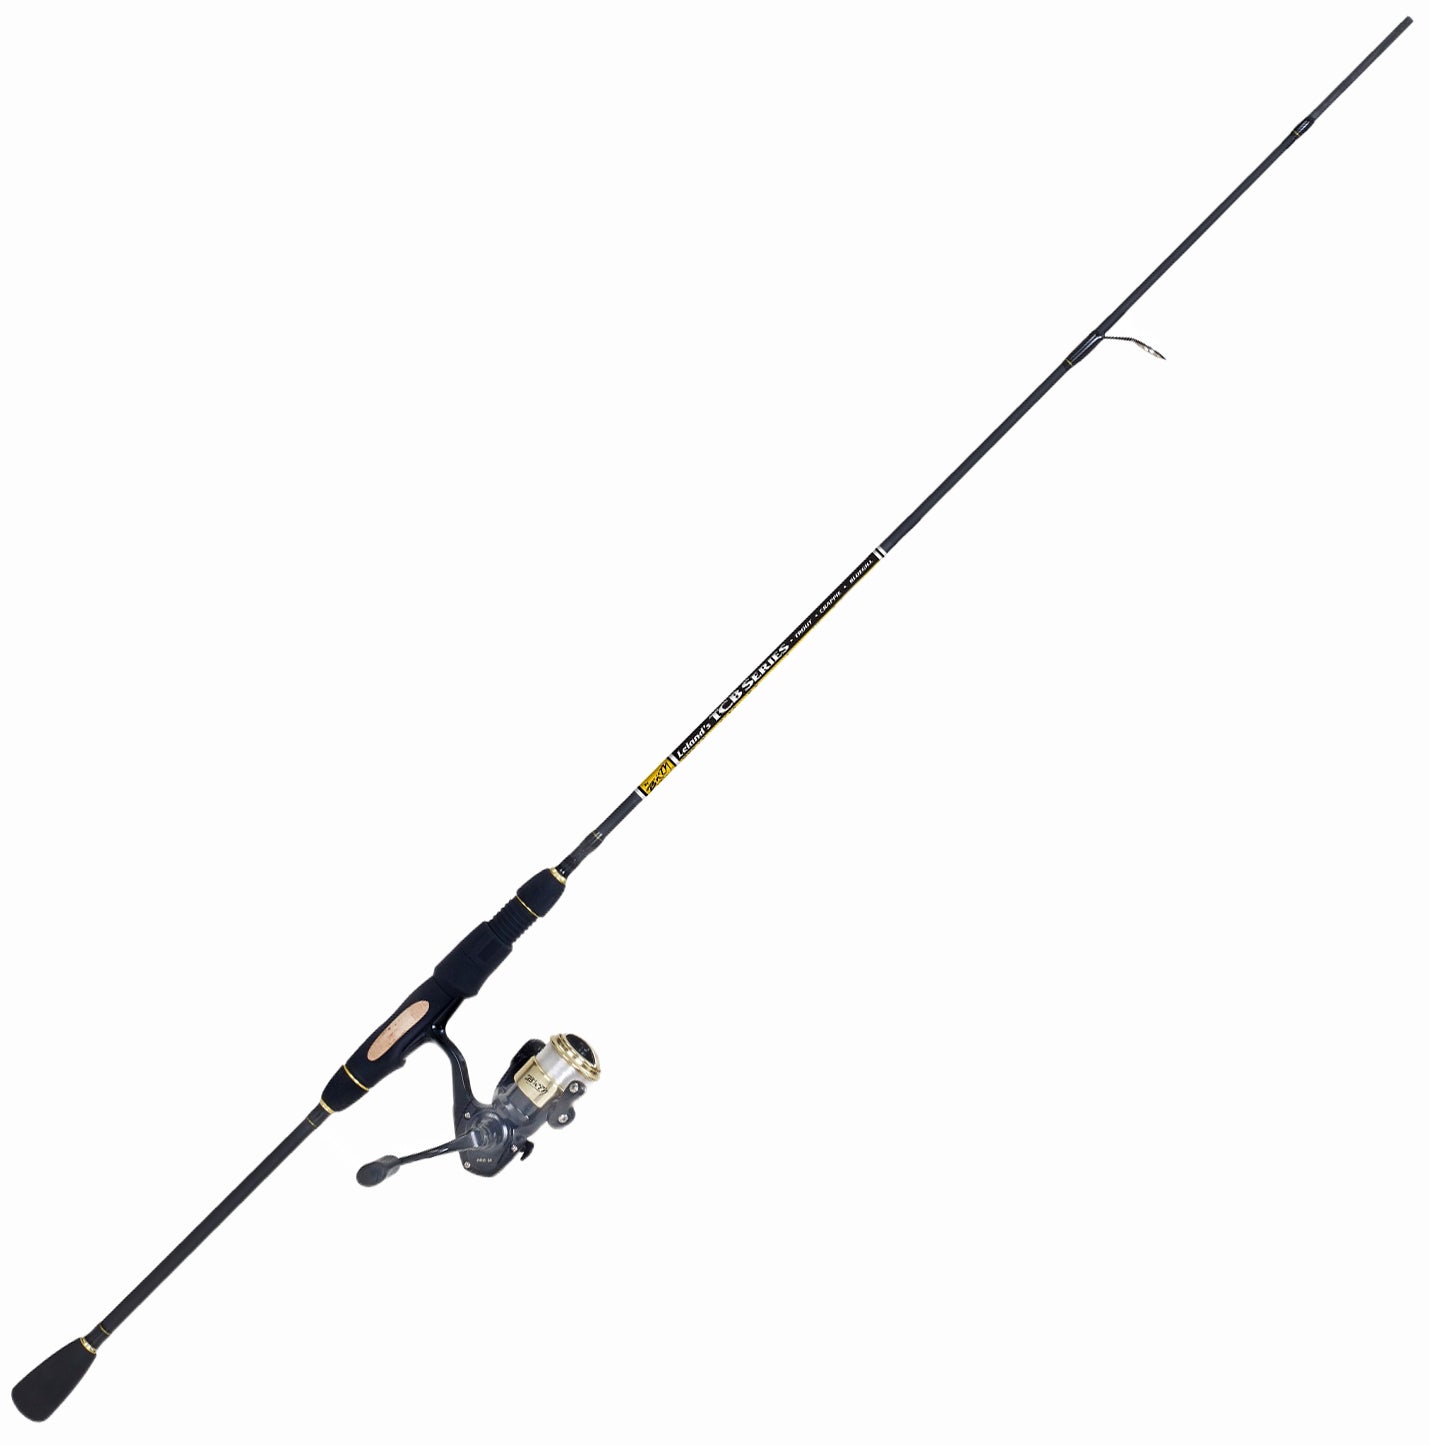 Buy lews spinning reel combo Online in INDIA at Low Prices at desertcart